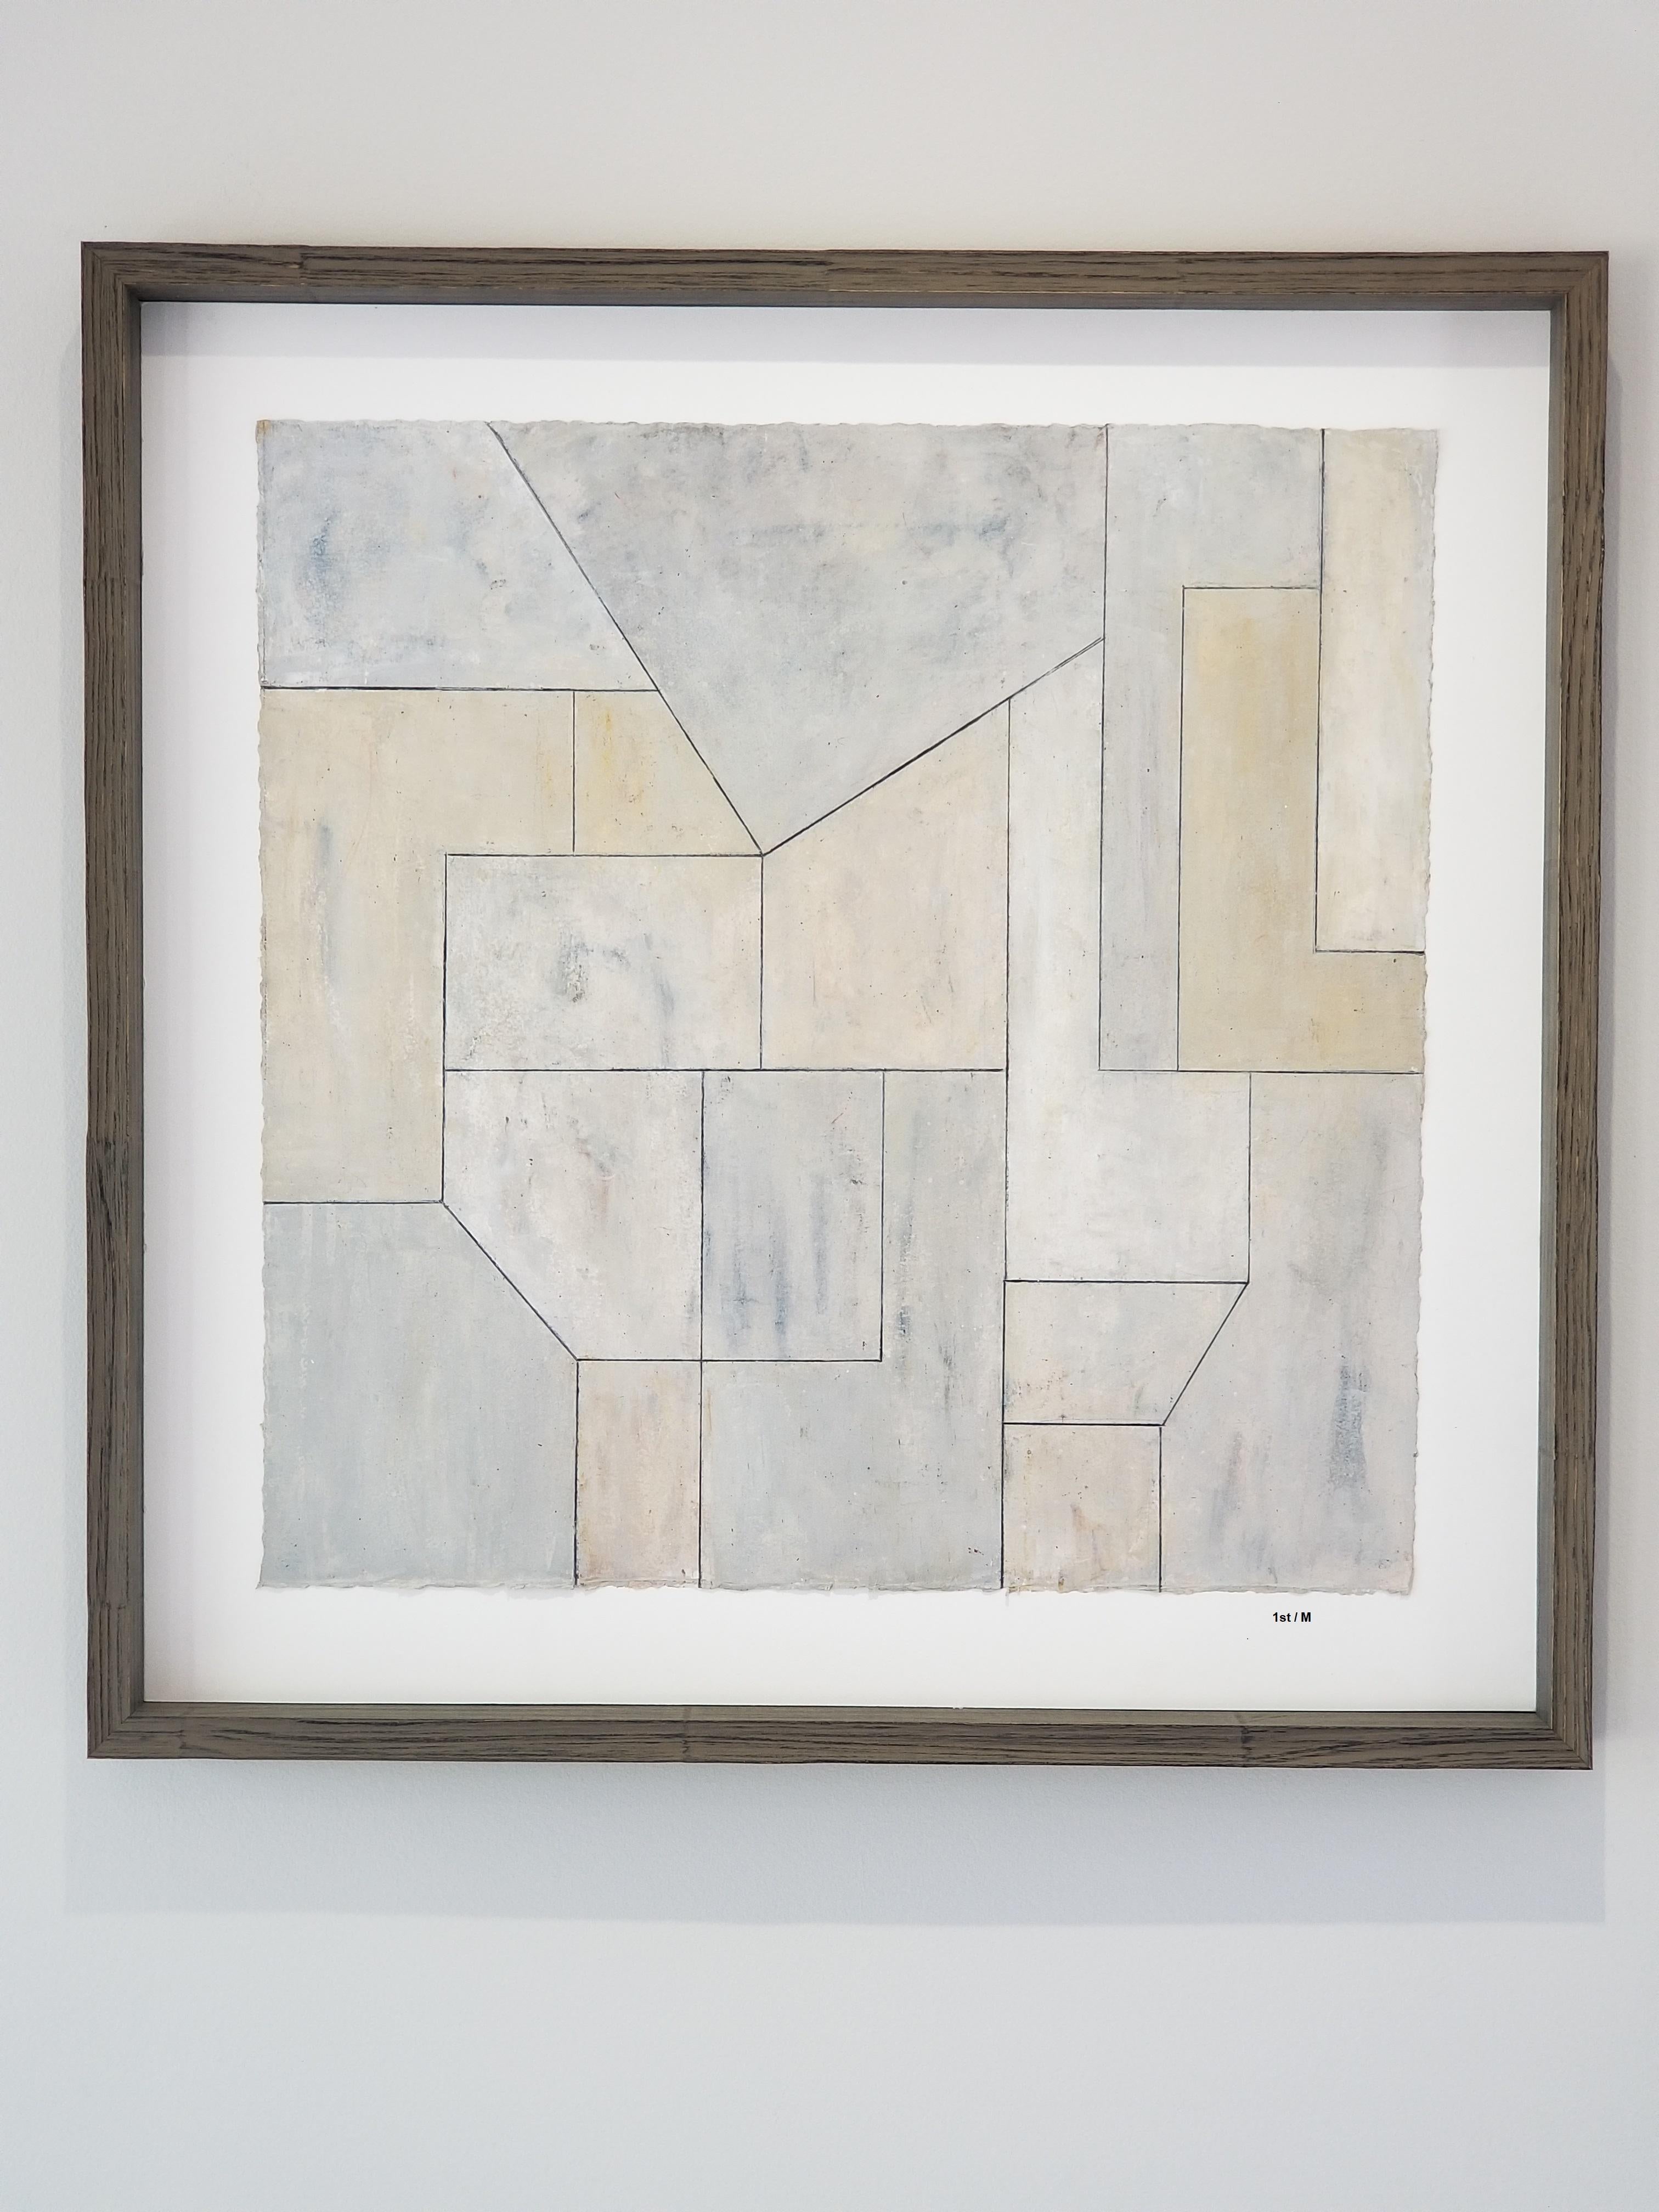 Stephen Cimini Abstract Painting - Oil painting on paper - framed in natural wood - Blue and Gray 2